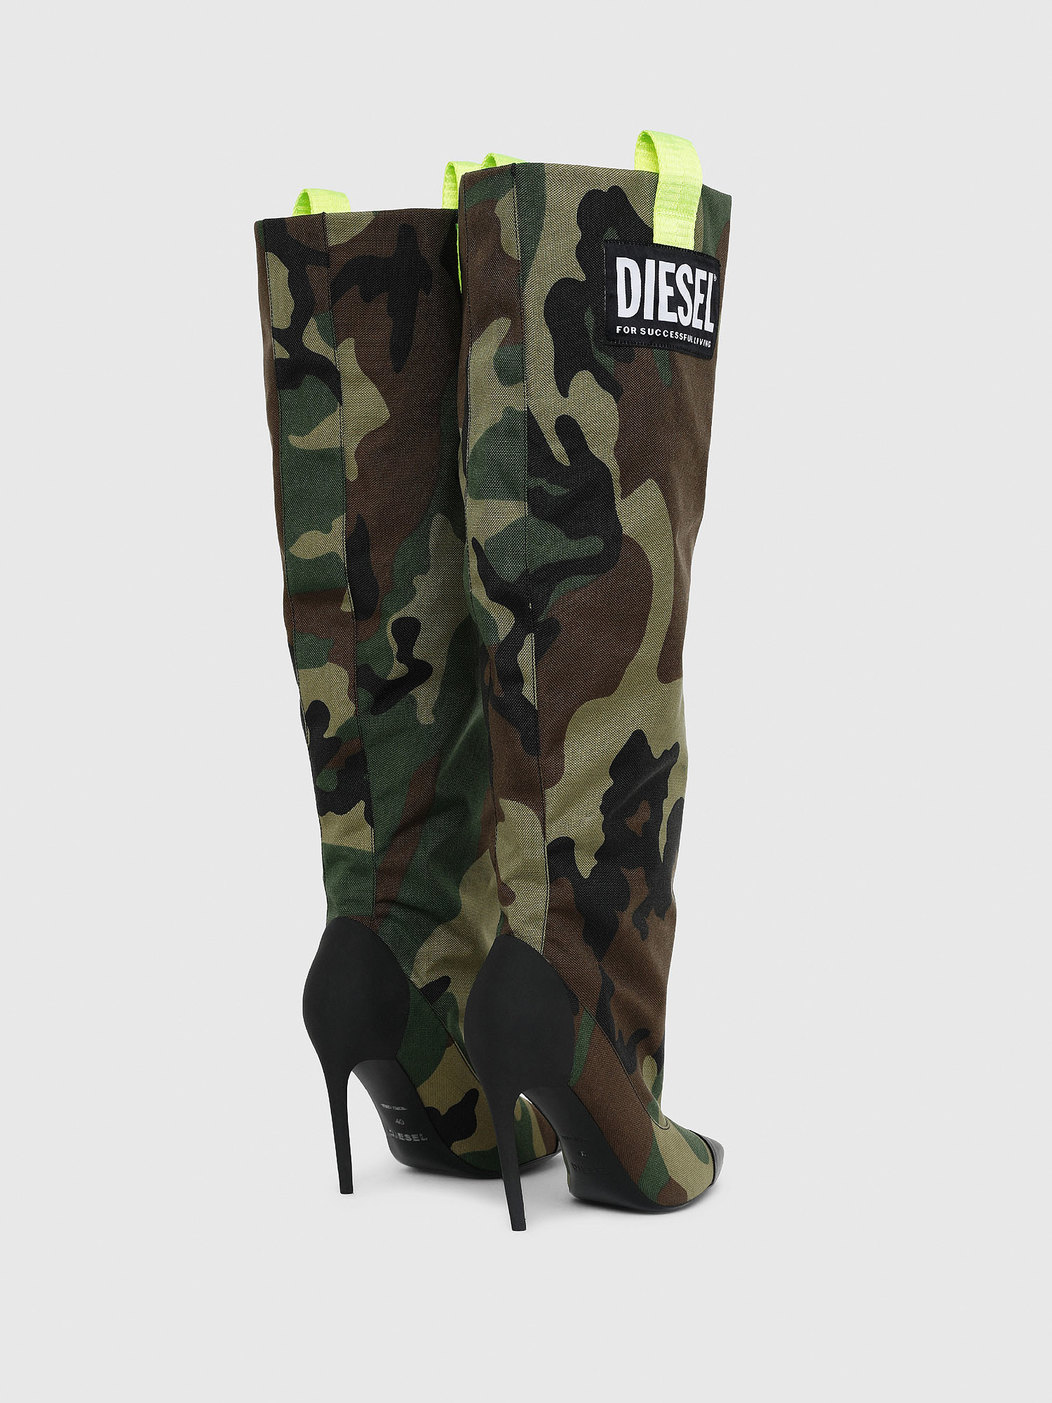 Camouflage Boots